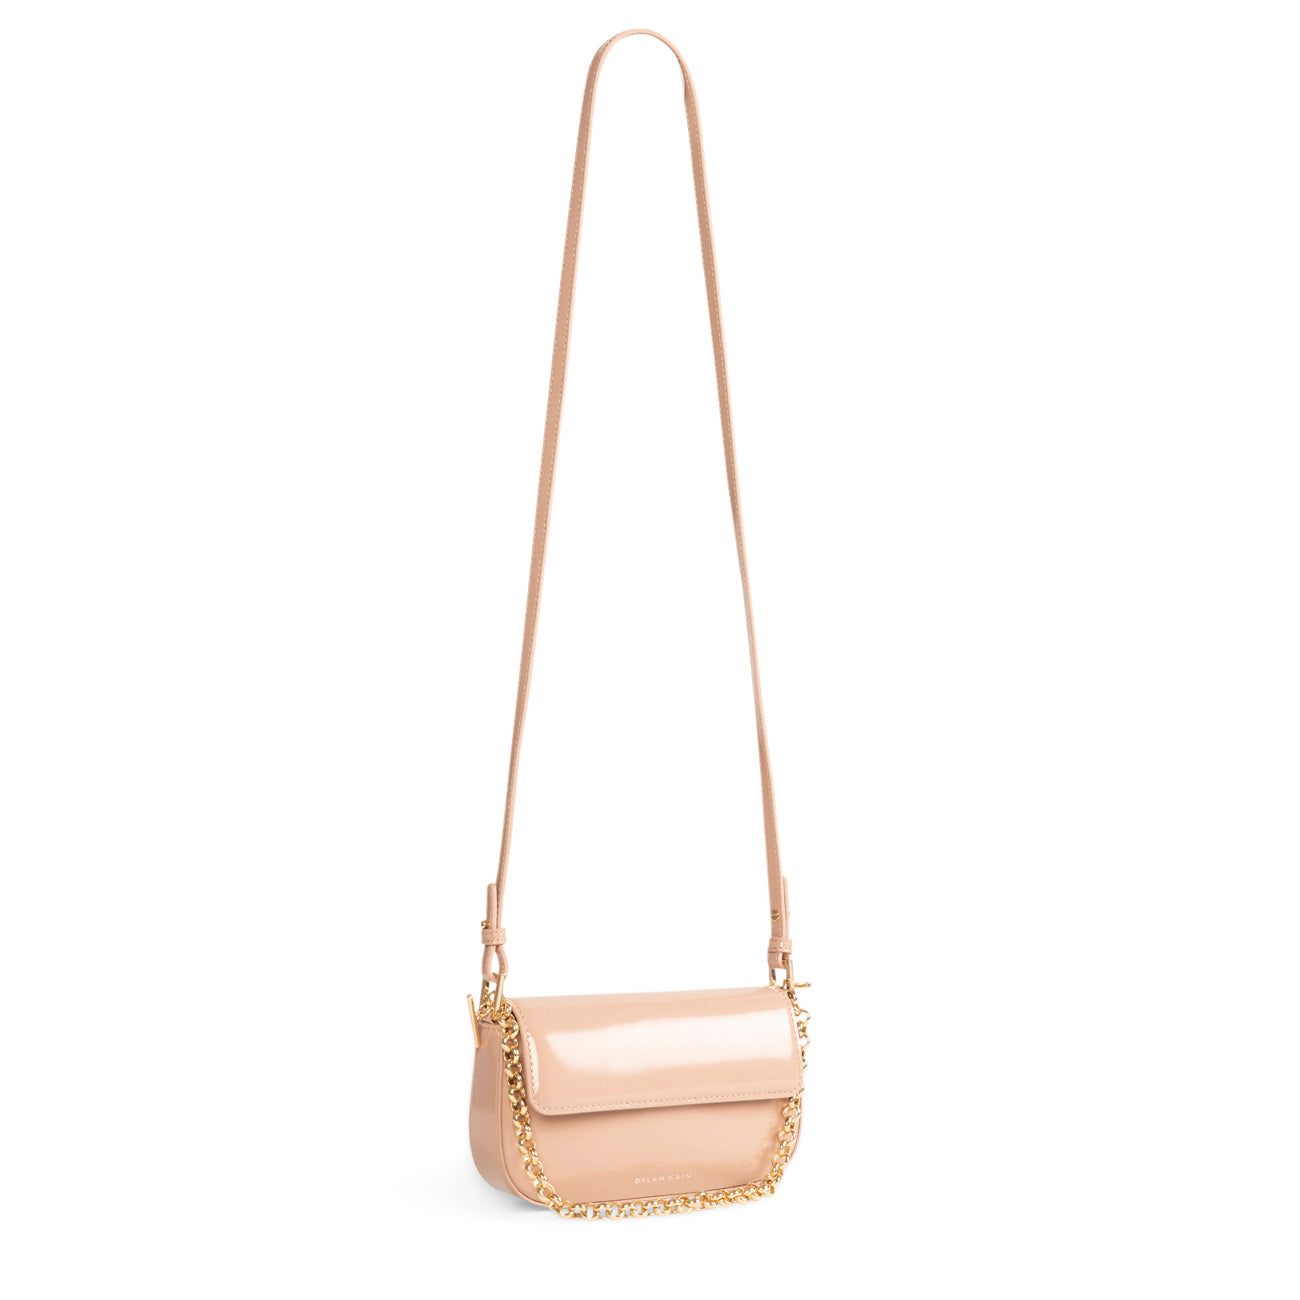 The Amelia Patent Bag Fawn - Gift Edit